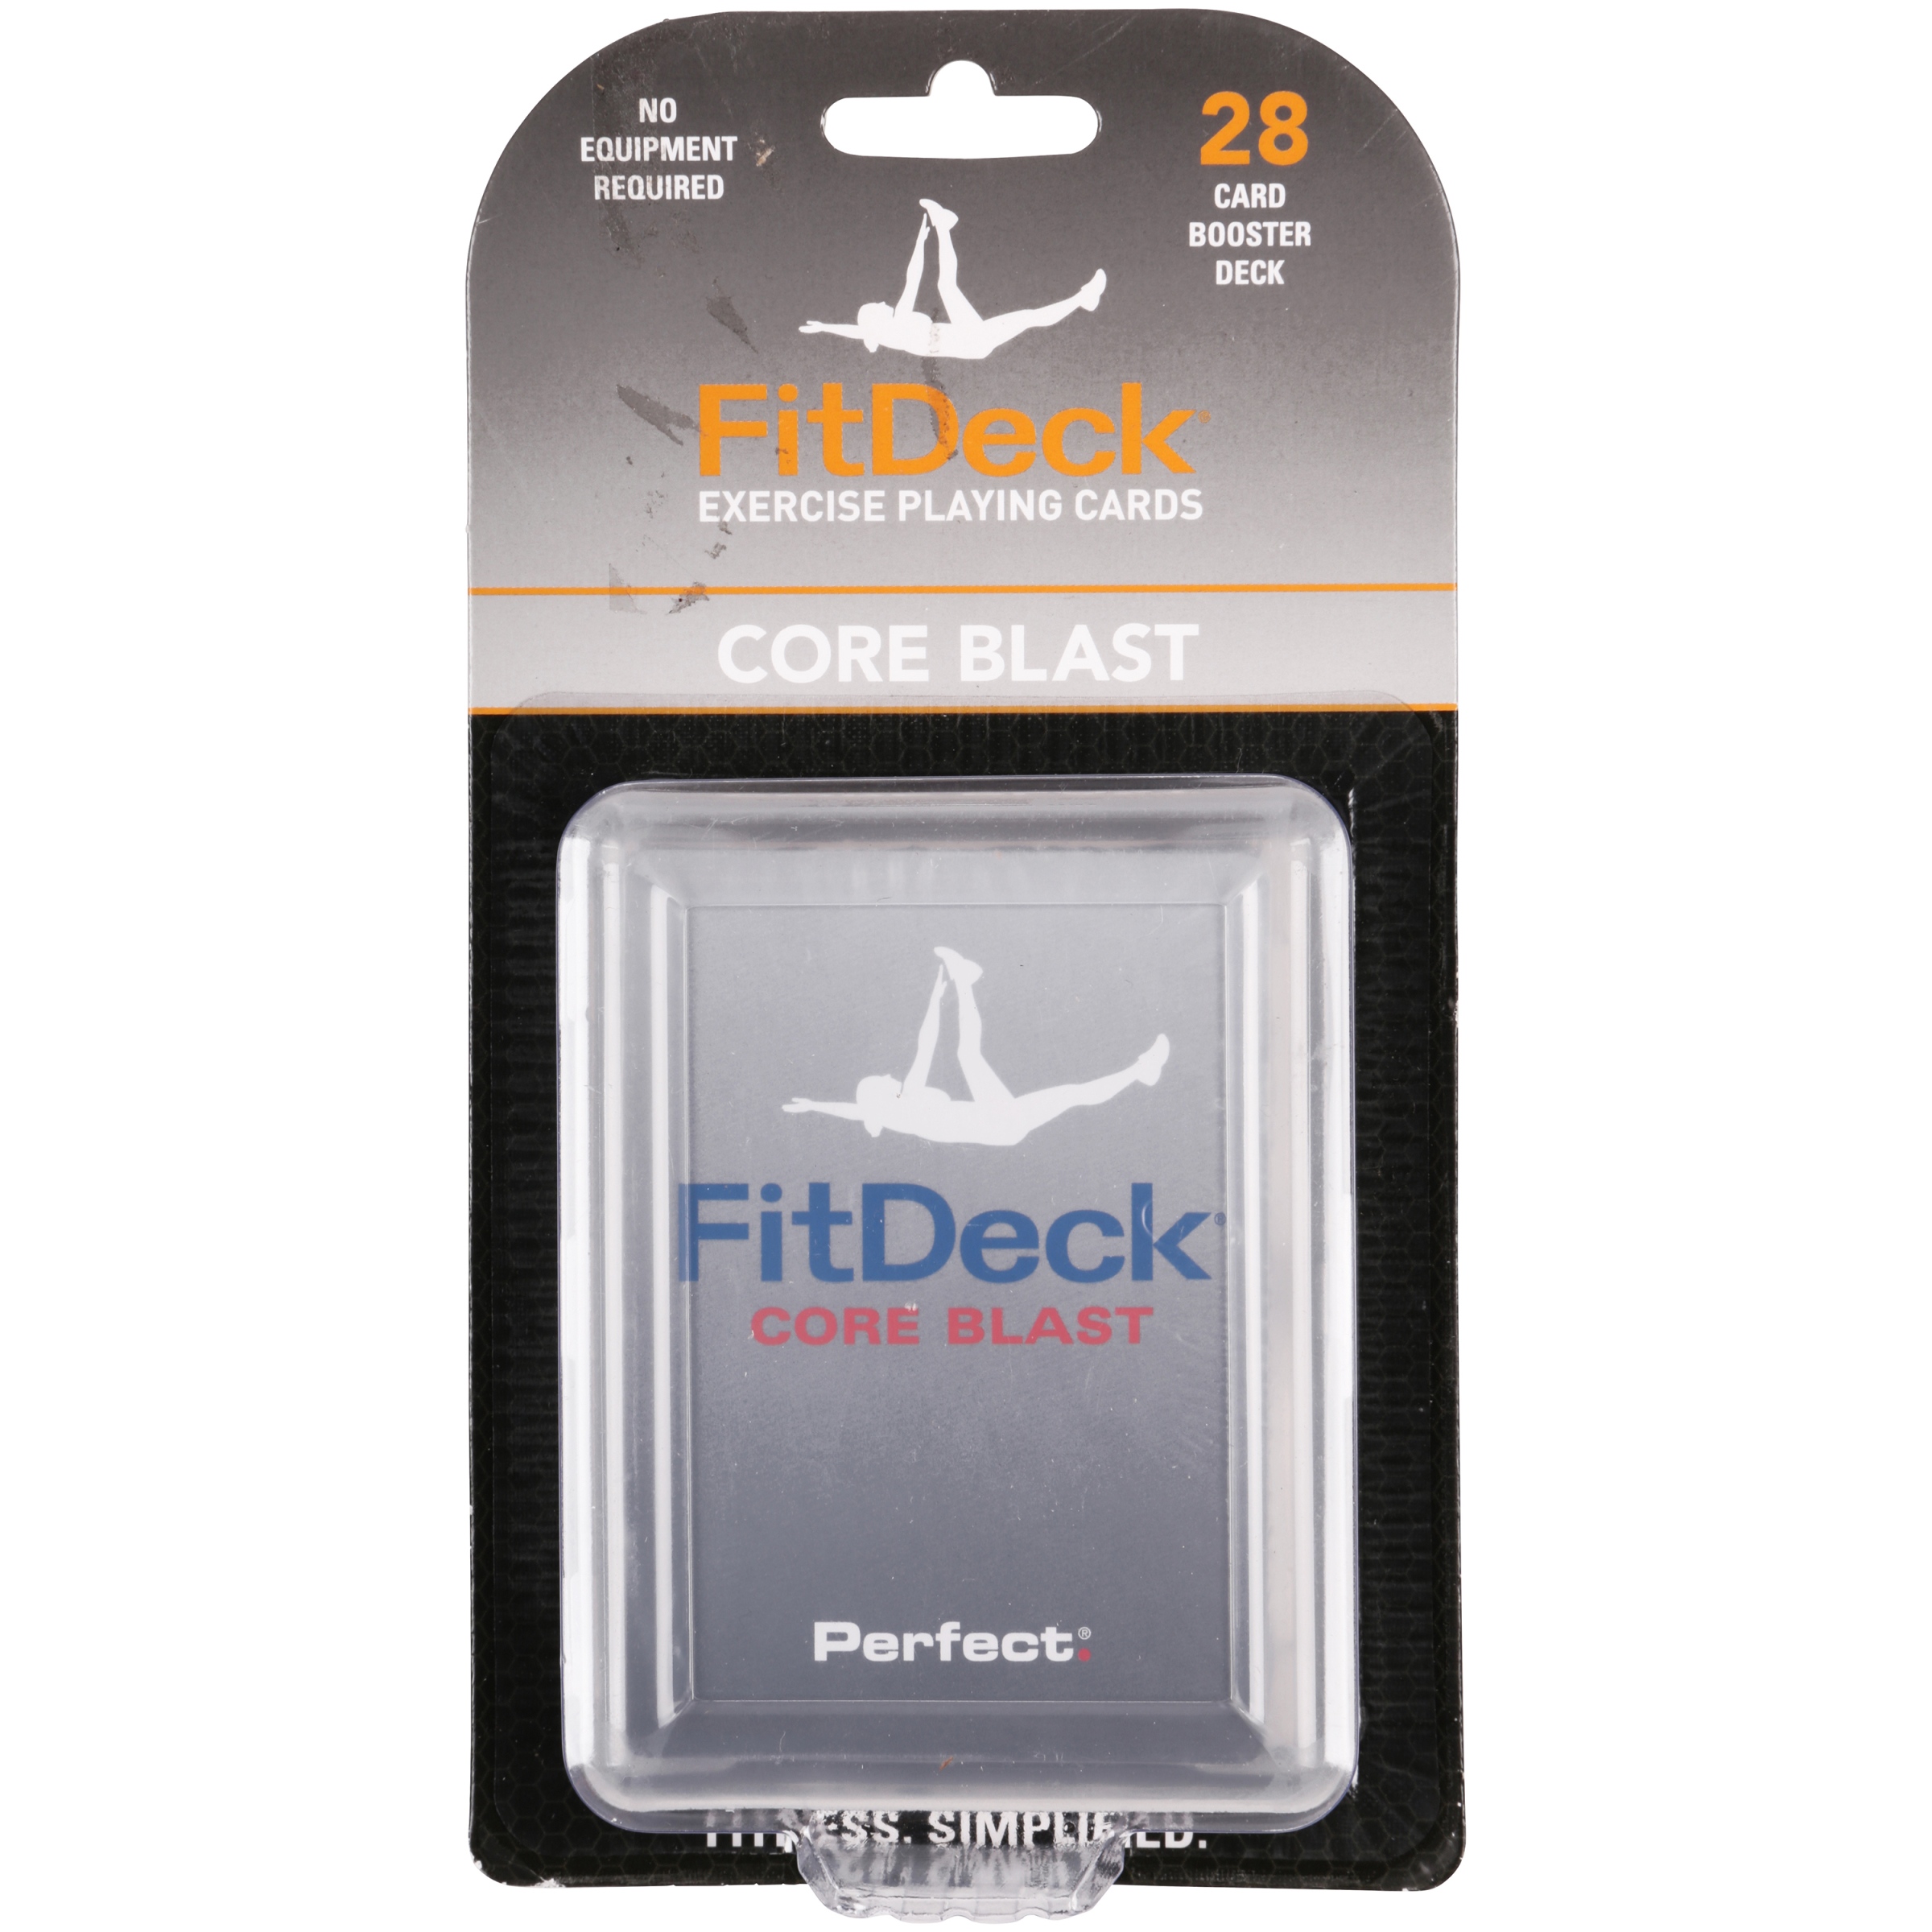 PerfectÂ® FitDeckÂ® Core Blast Exercise Playing Cards Booster Deck 28 pc Pack - image 2 of 4